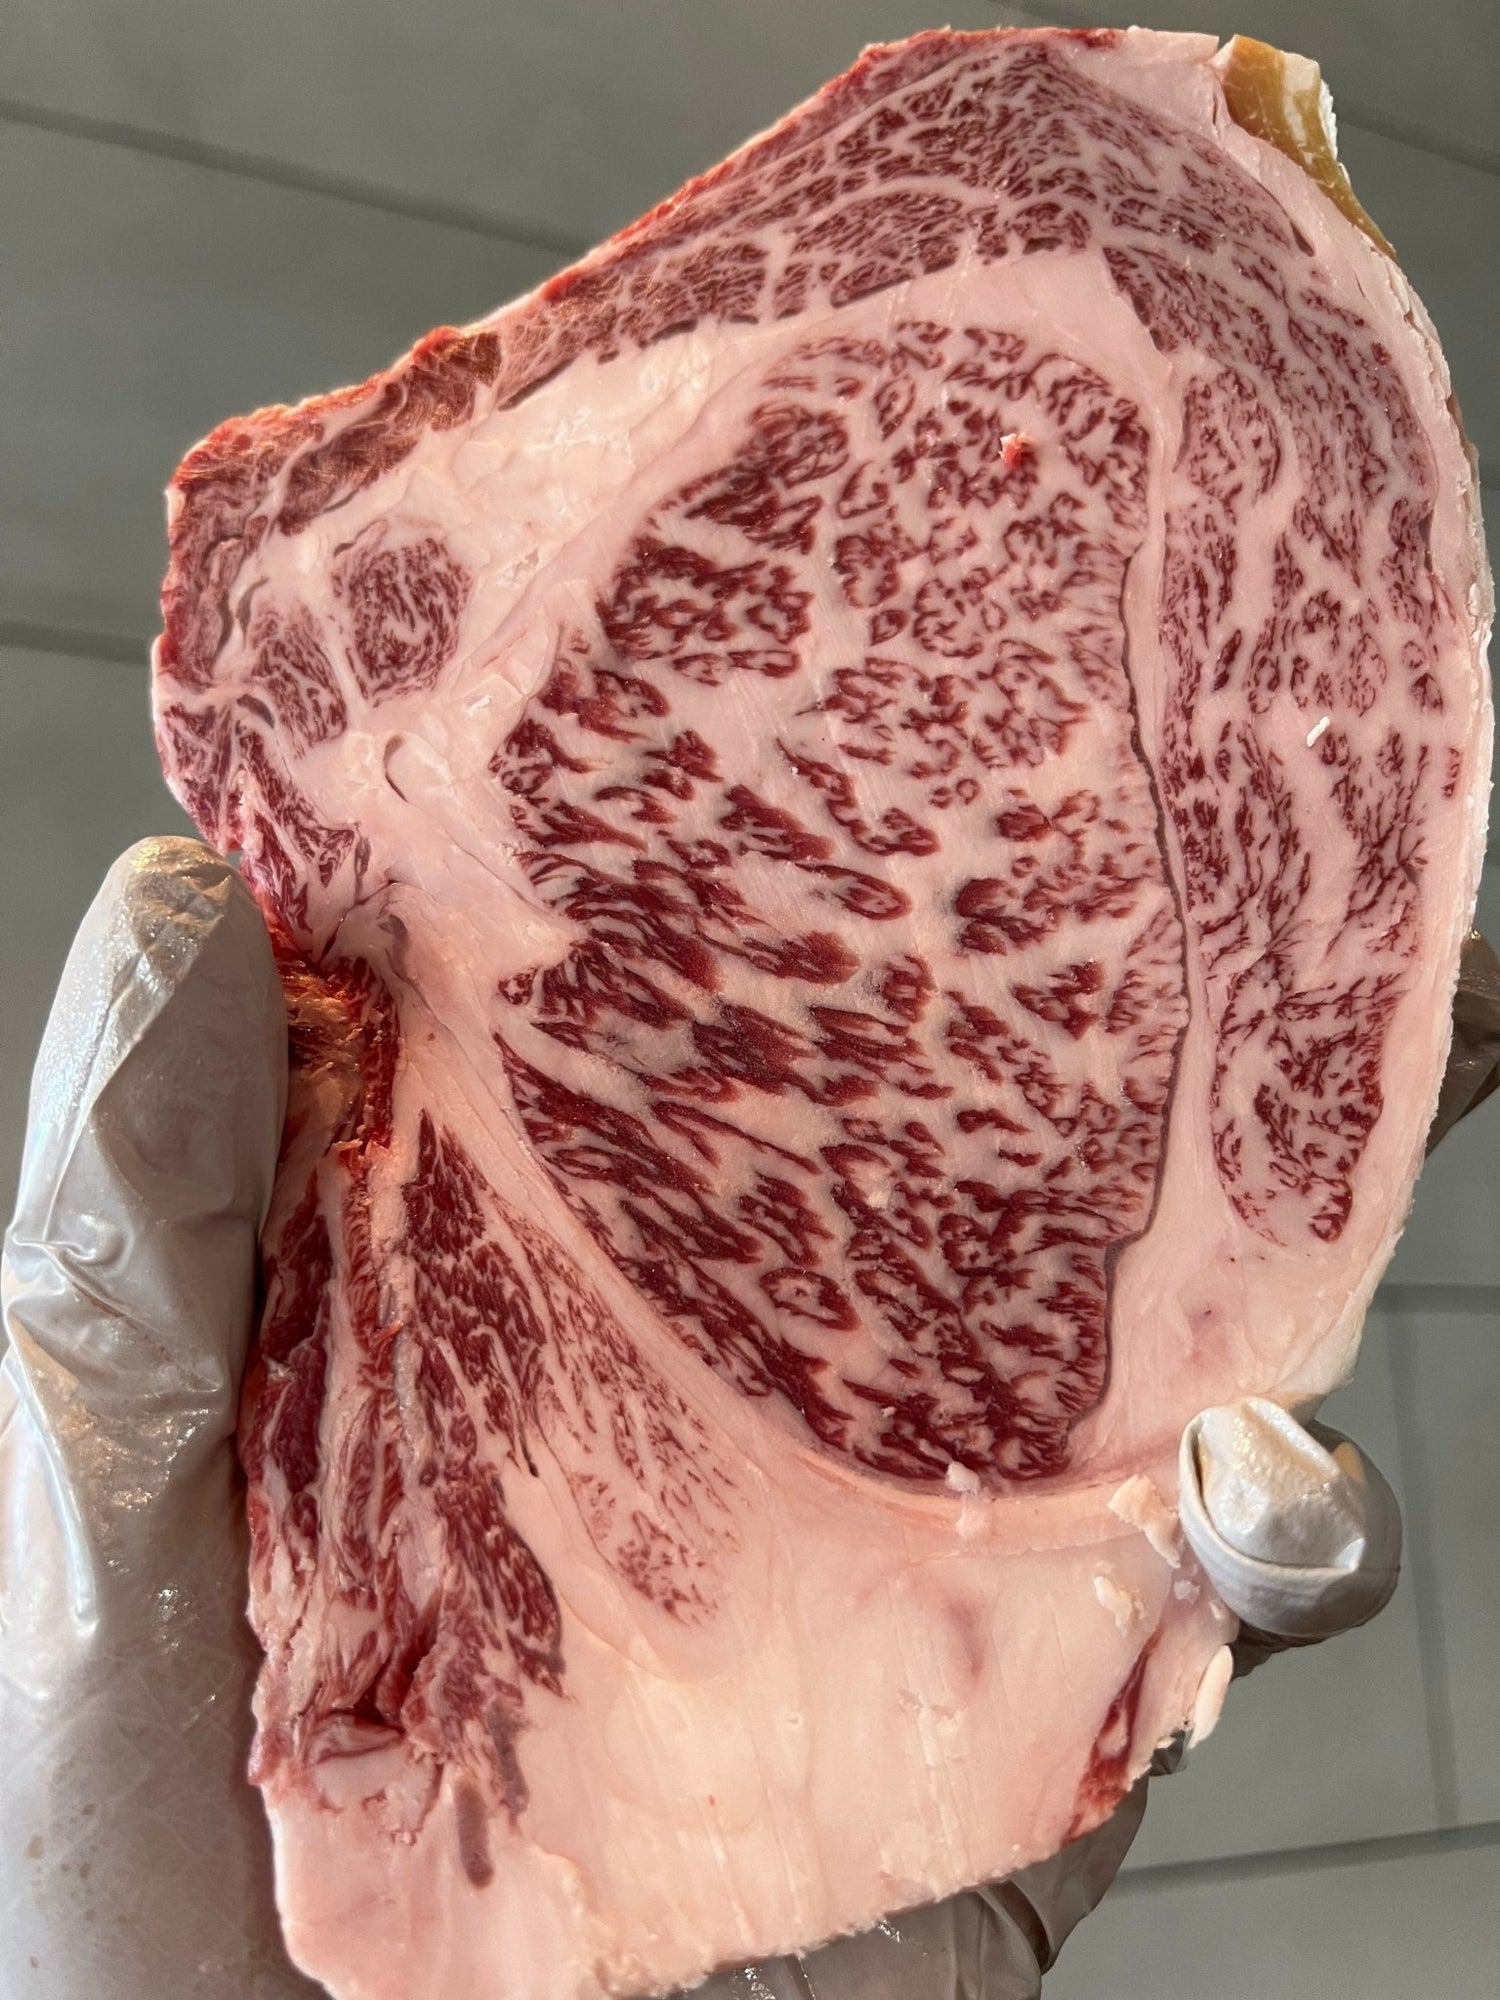 MRS. Wagyu. (8 Year aged Cattle) available dry aged - PursuitFarms